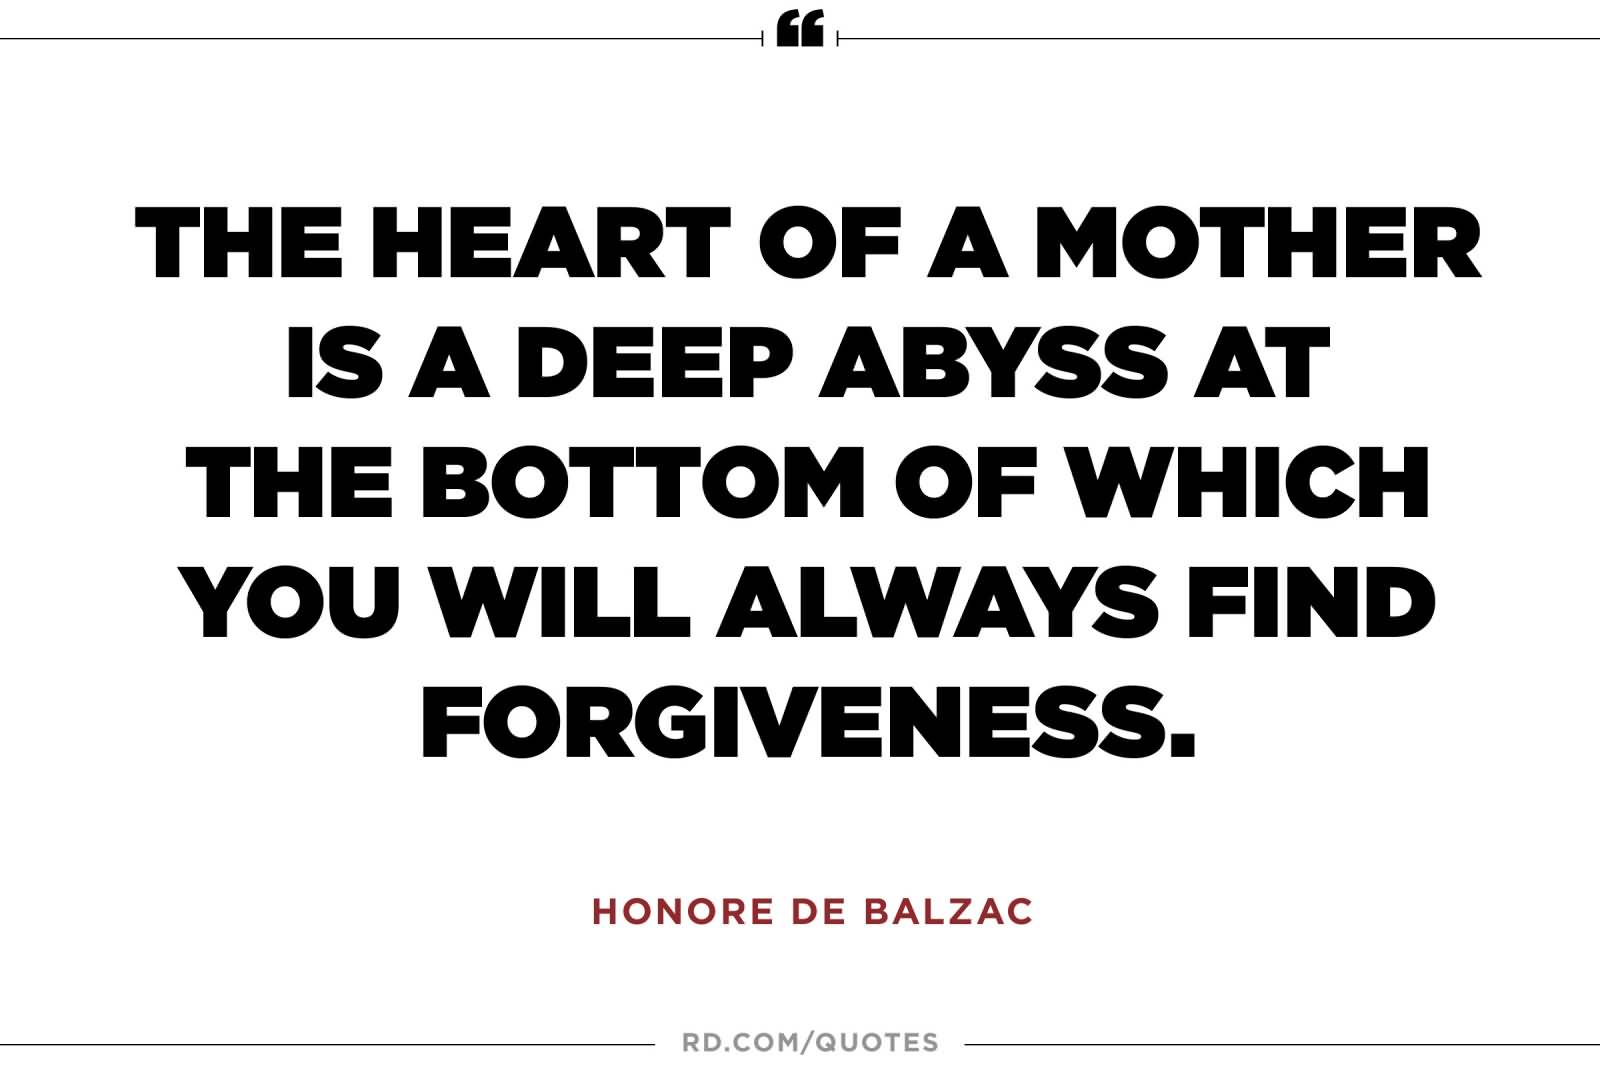 The heart of a mother is a deep abyss at the bottom of which you will always find forgiveness. Honore de Balzac